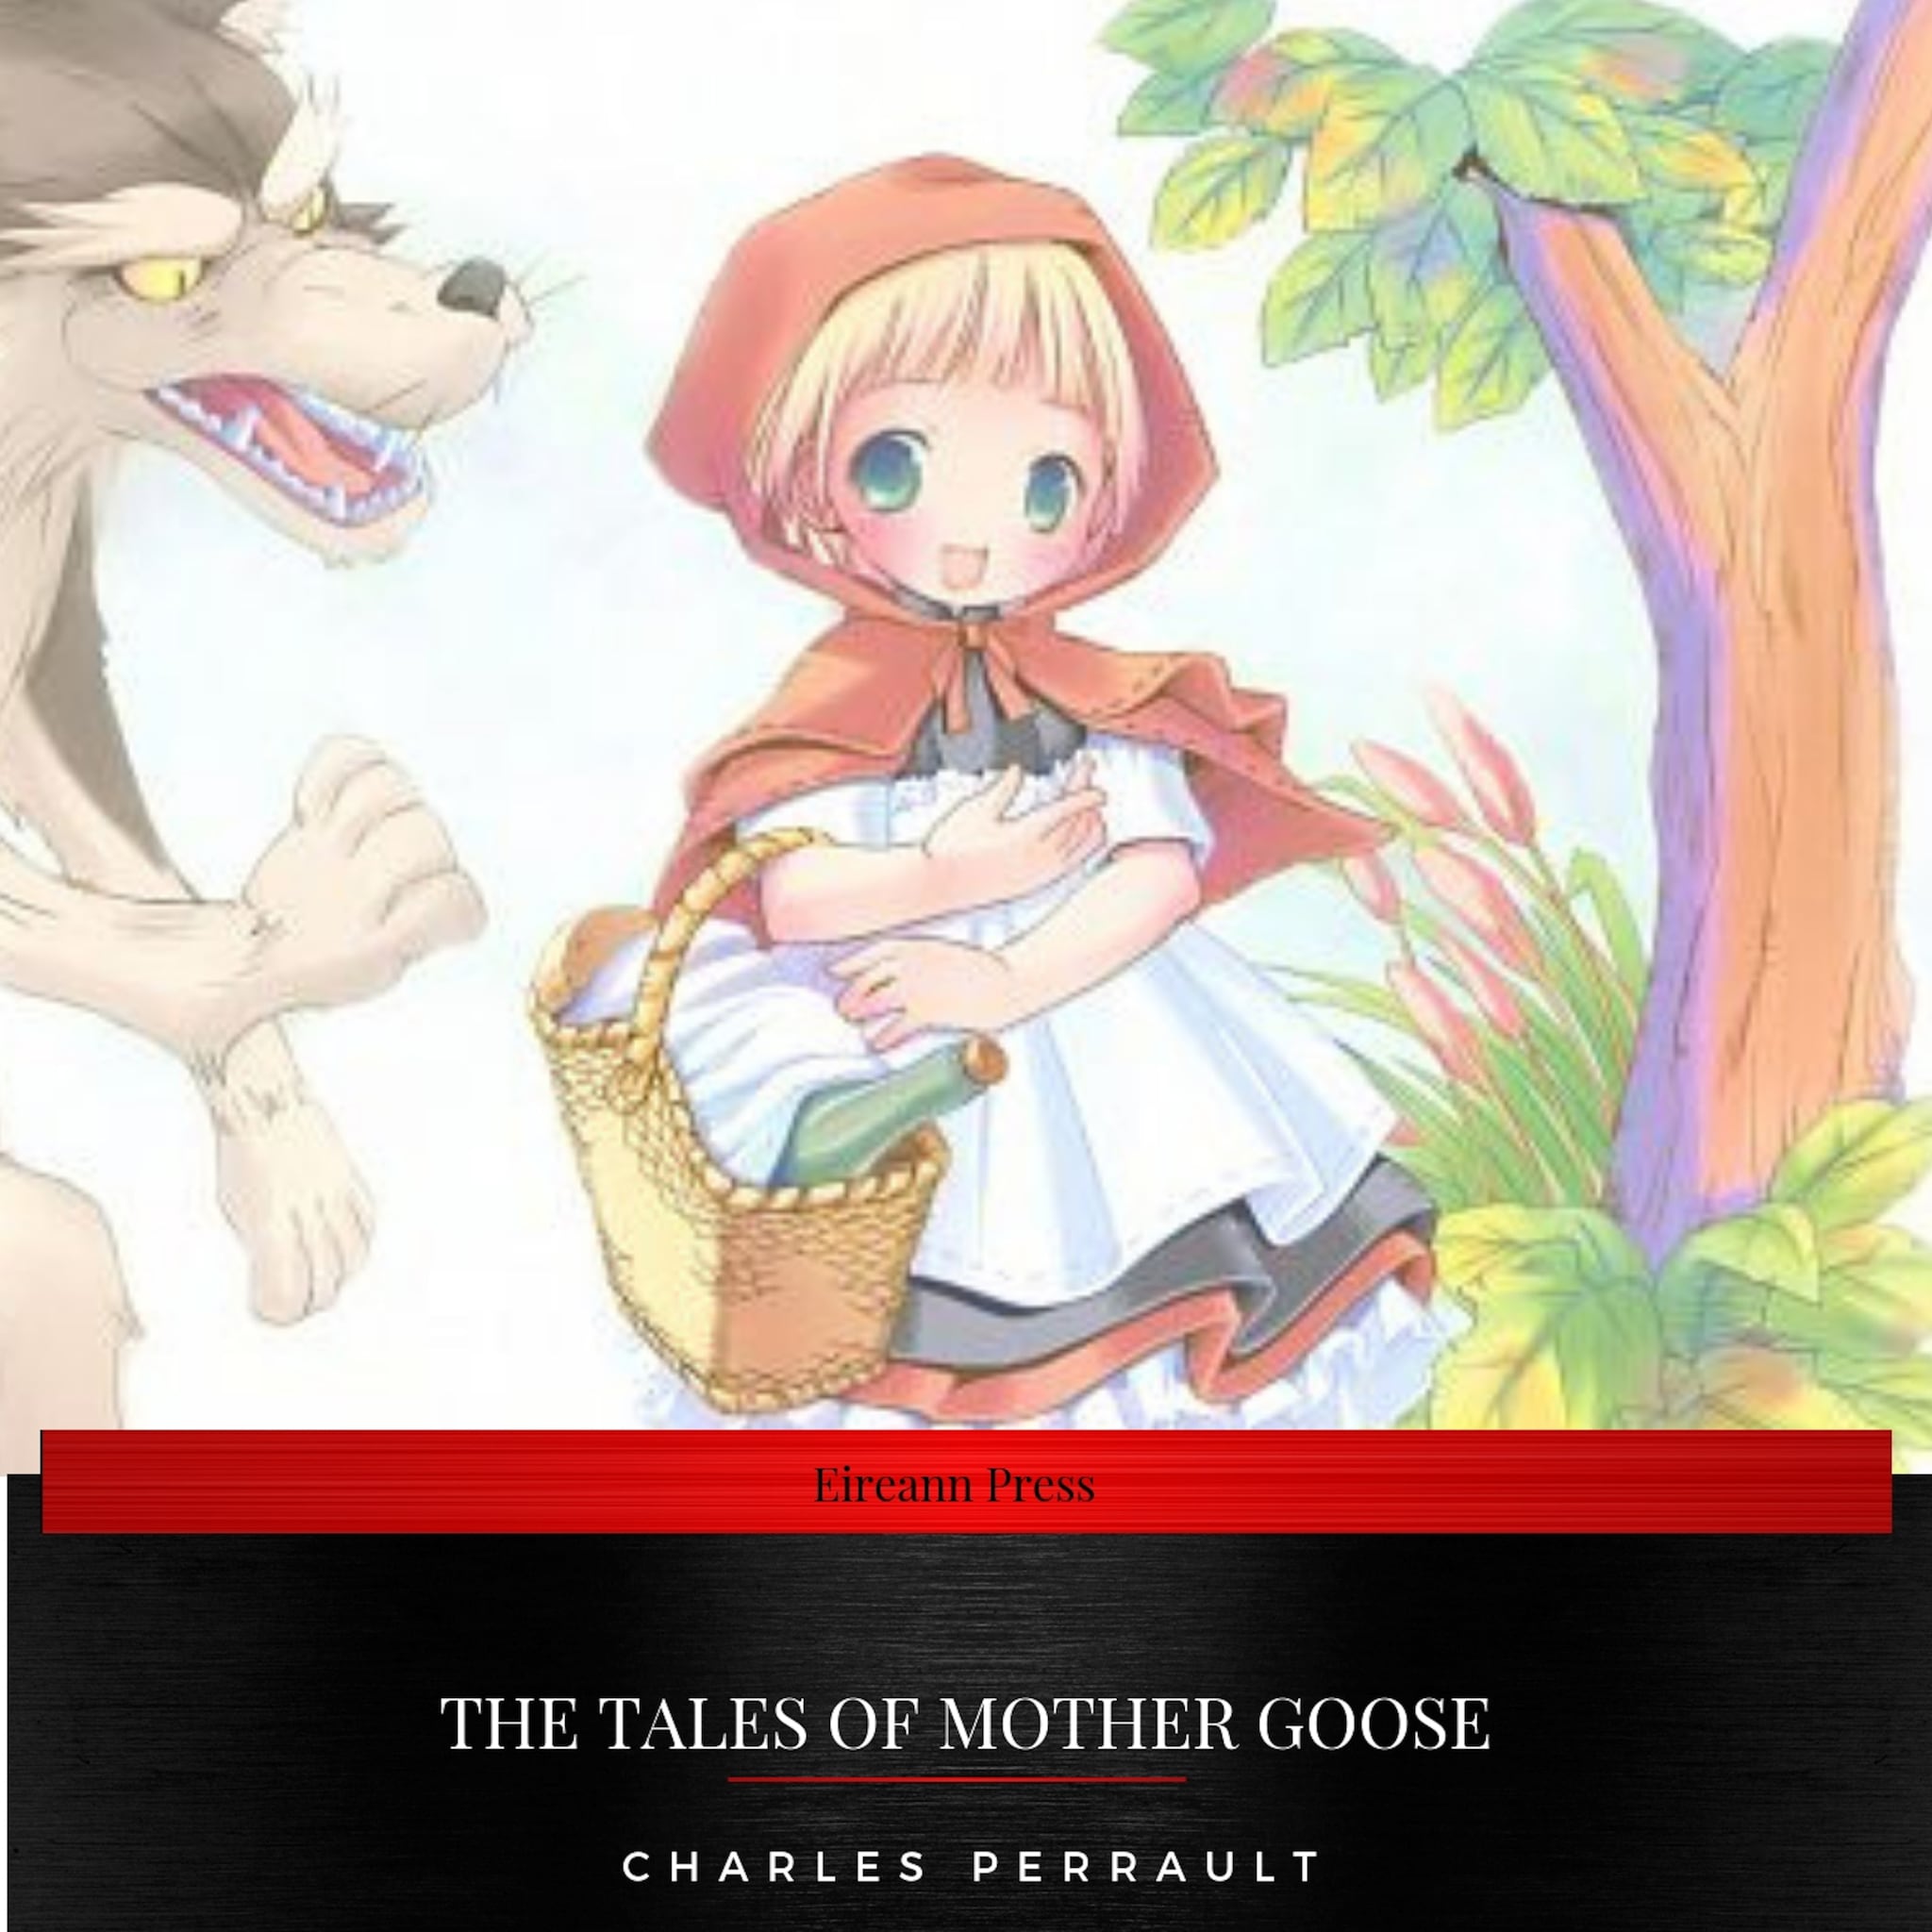 the tales of mother goose by charles perrault